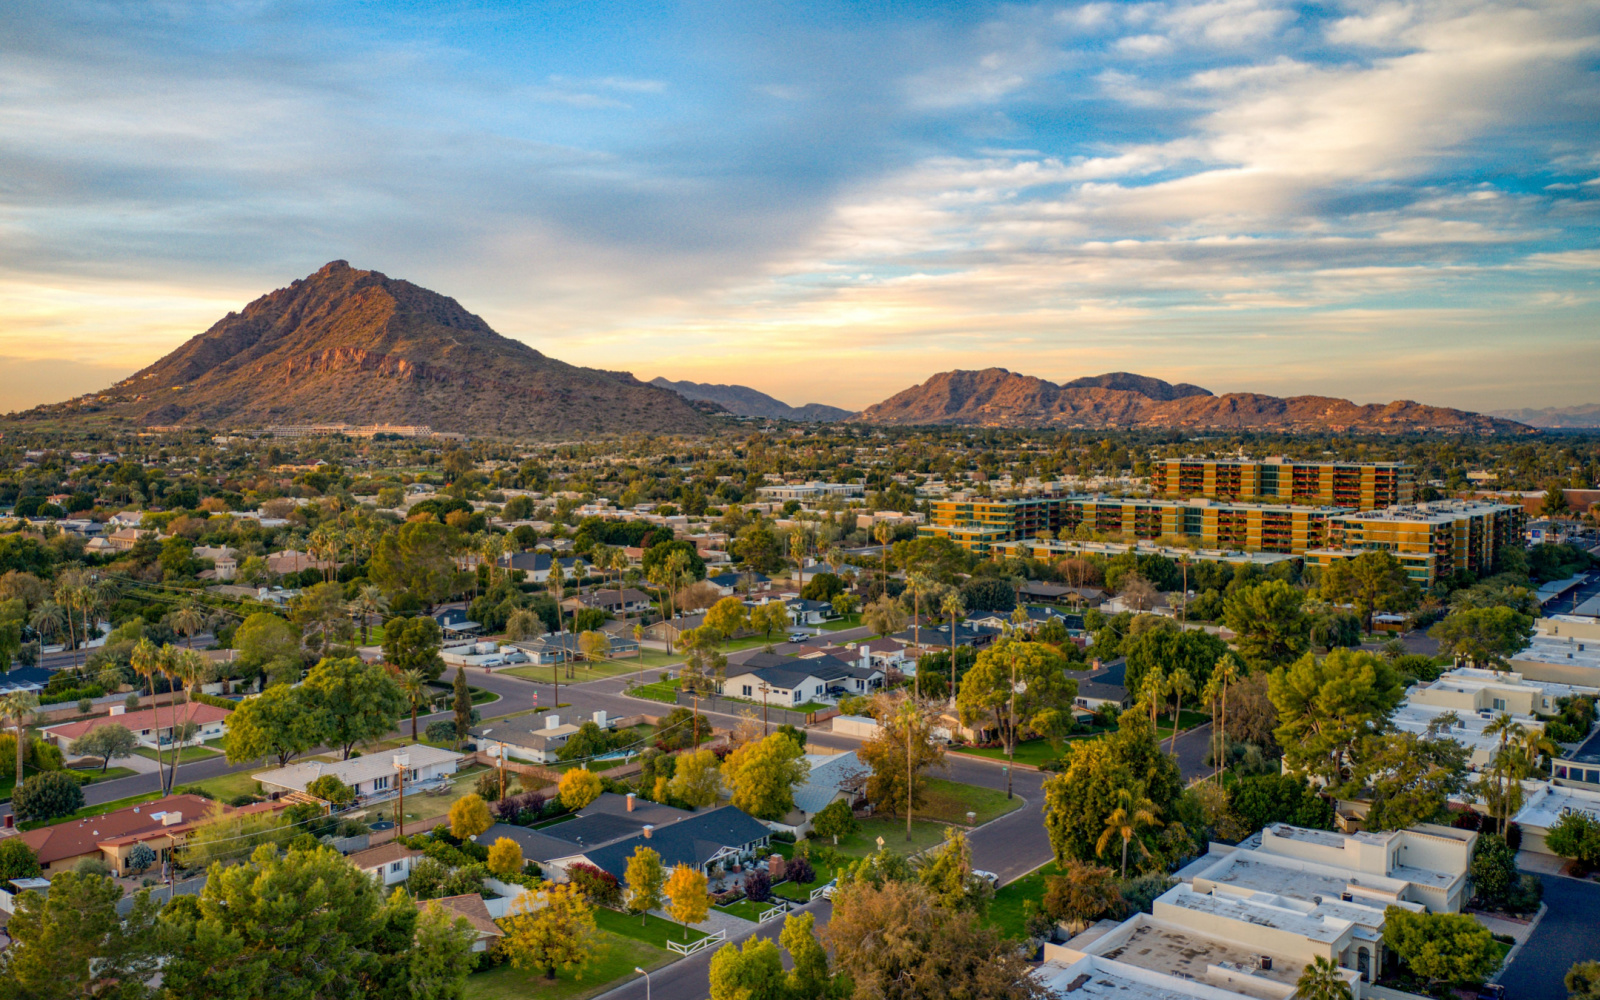 The Best Time to Visit Scottsdale in 2023 | When to Go